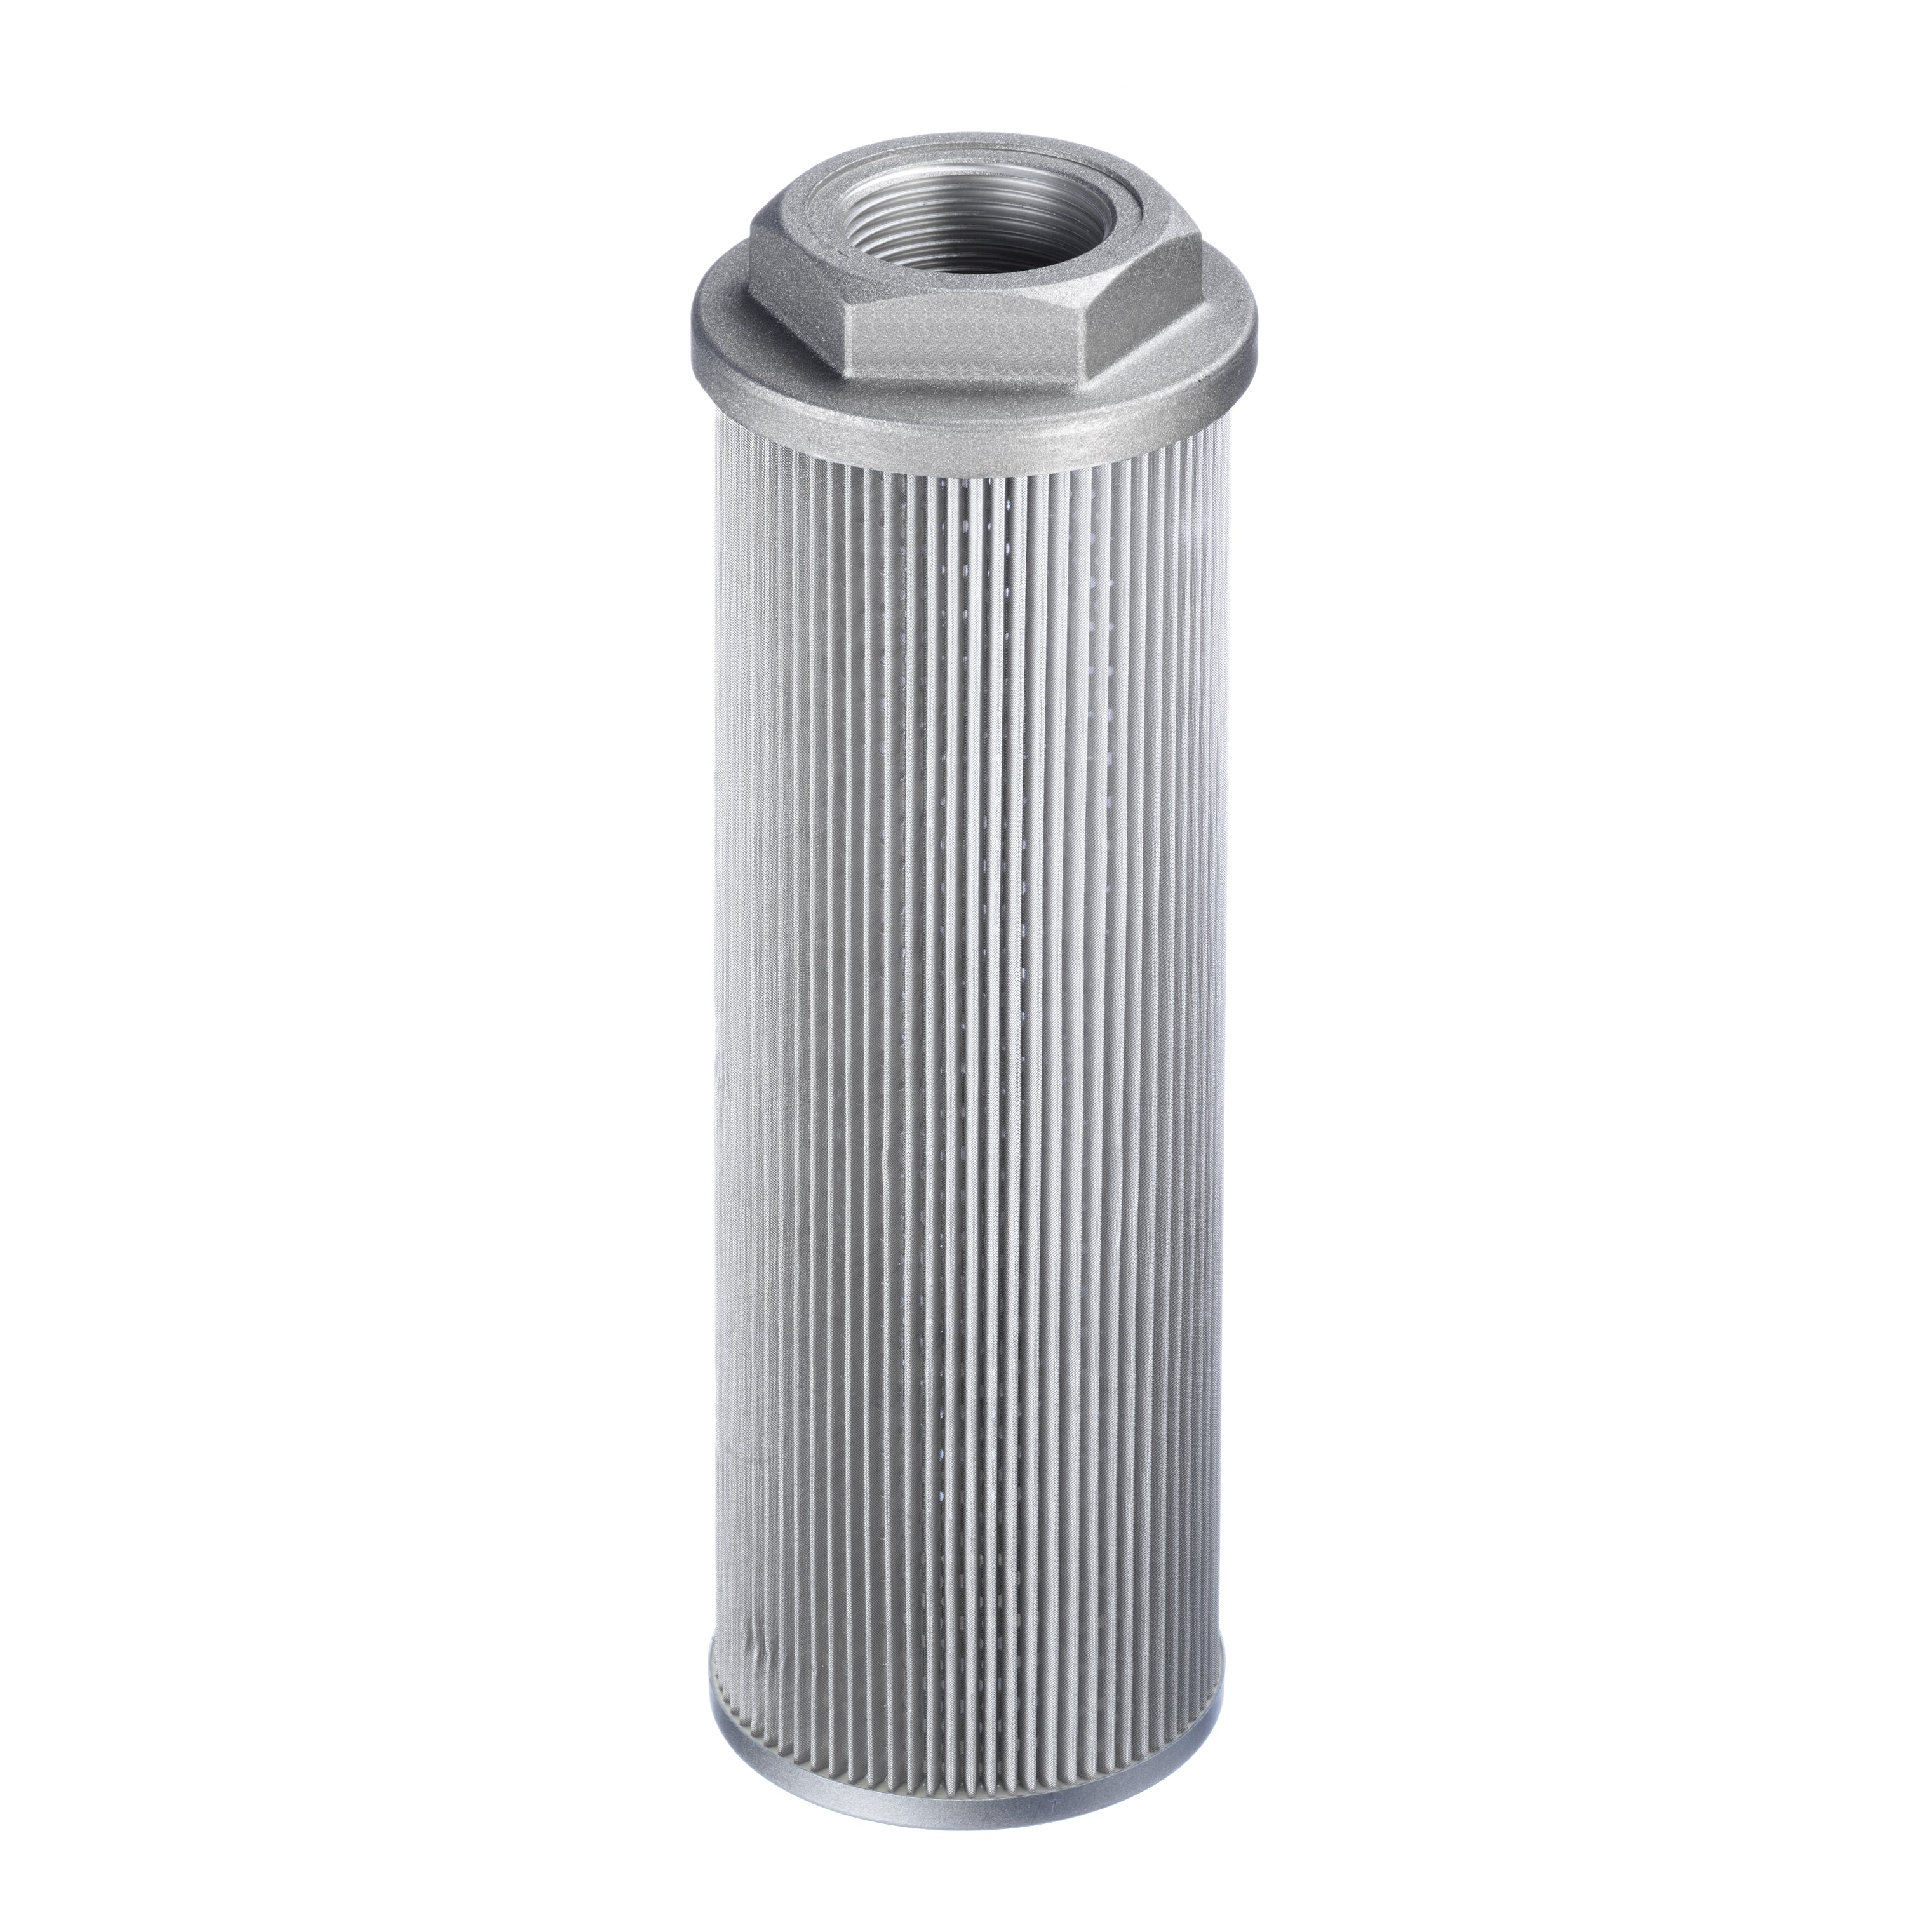 SUS-088-N24-260-125-A-O : Stauff Suction Strainer, Aluminum End Cap, 1.5" NPT, 36.4GPM, 125 Micron, No Bypass